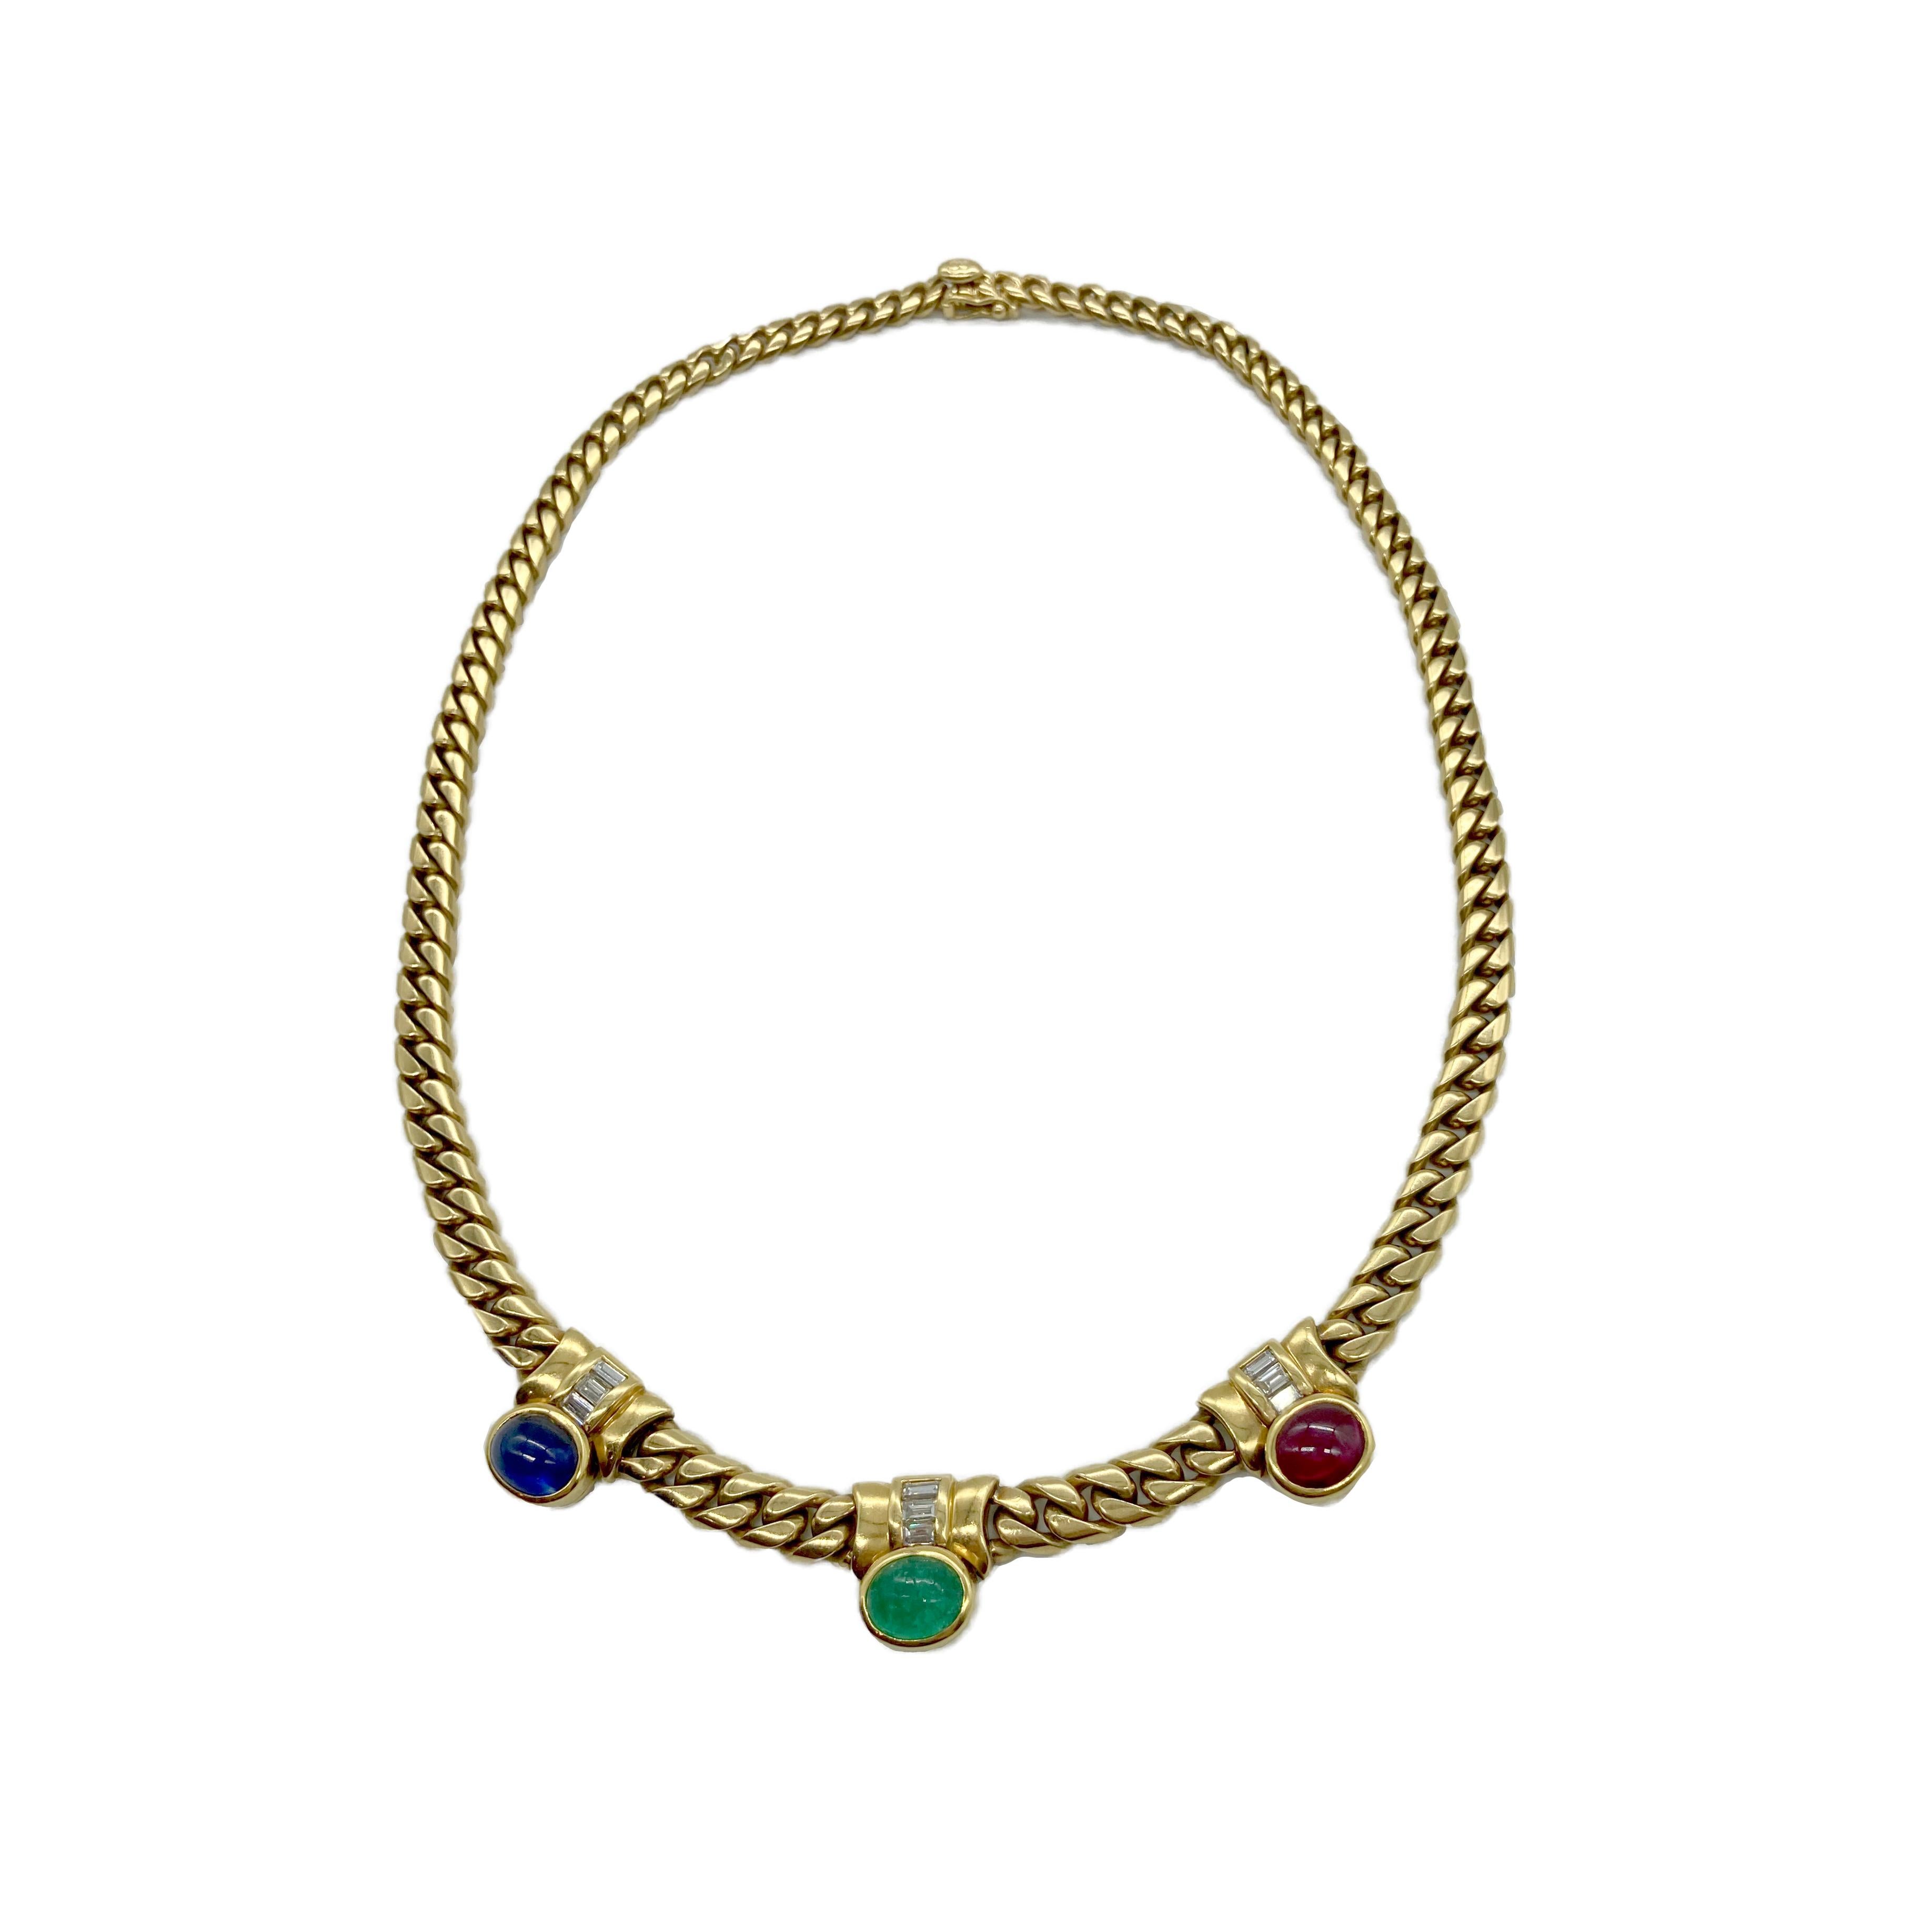 A beautiful Bulgari necklace with multi-color precious gemstones suspended from an 18 karat yellow gold chain. Circa 1970s.